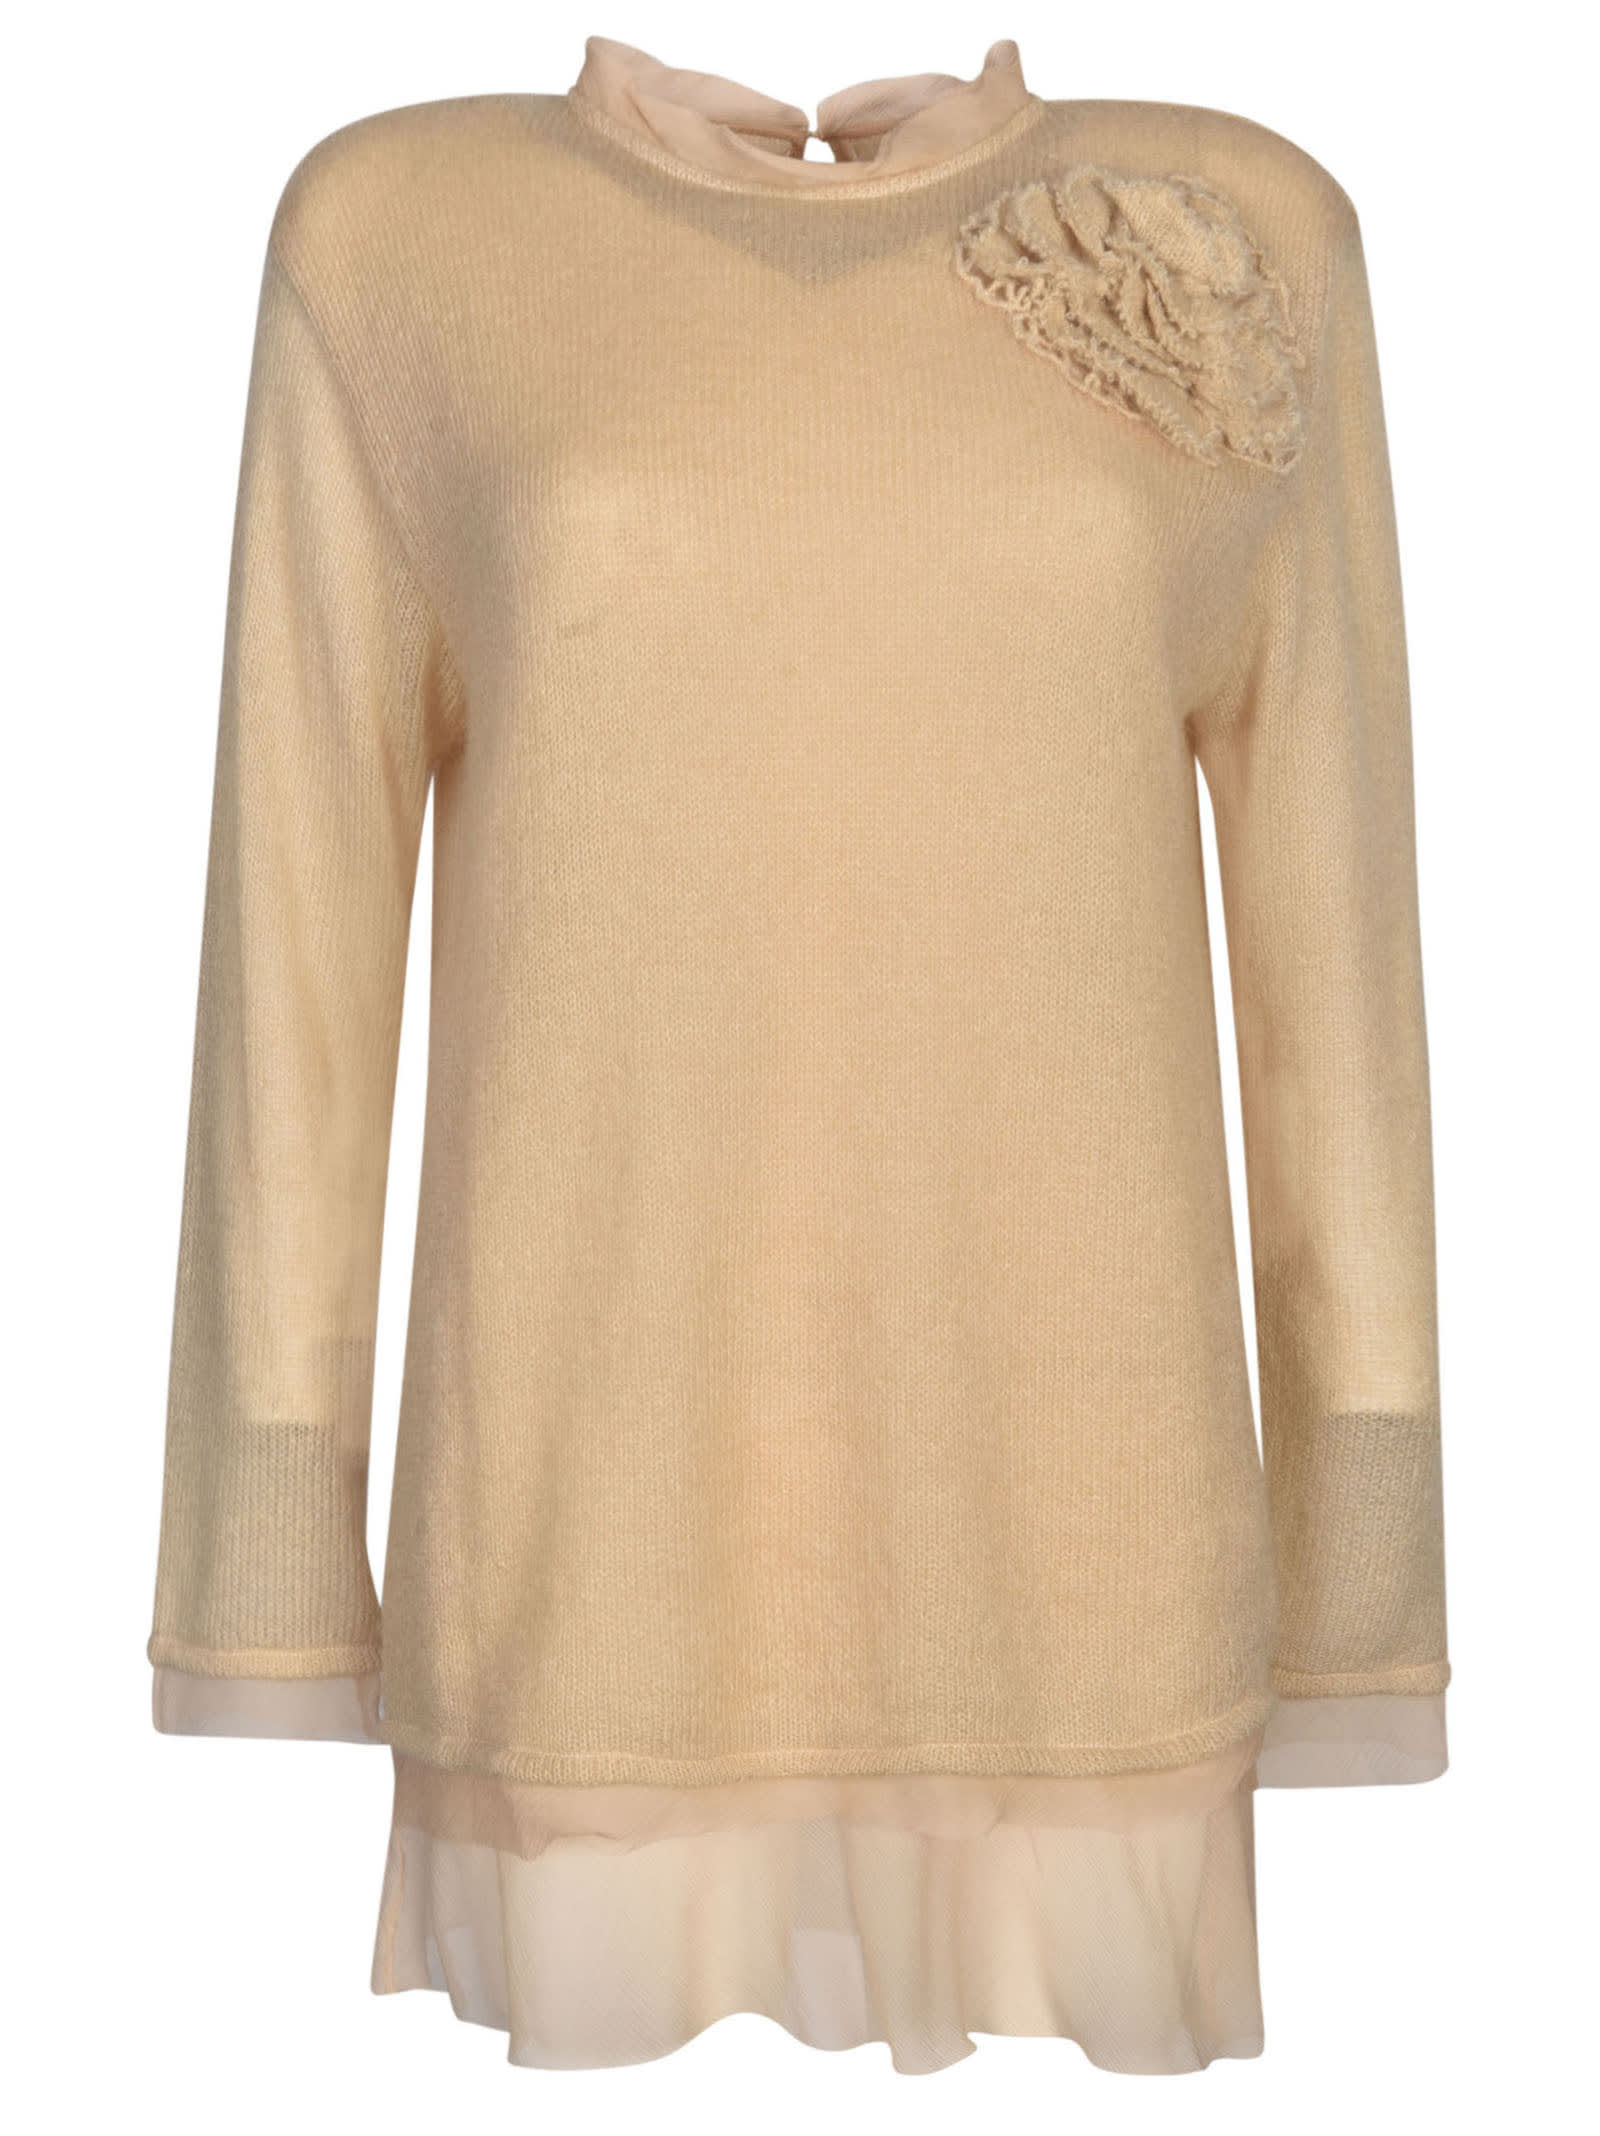 Ermanno Scervino Floral Embroidery Lace Paneled Knit Sweater In Beige